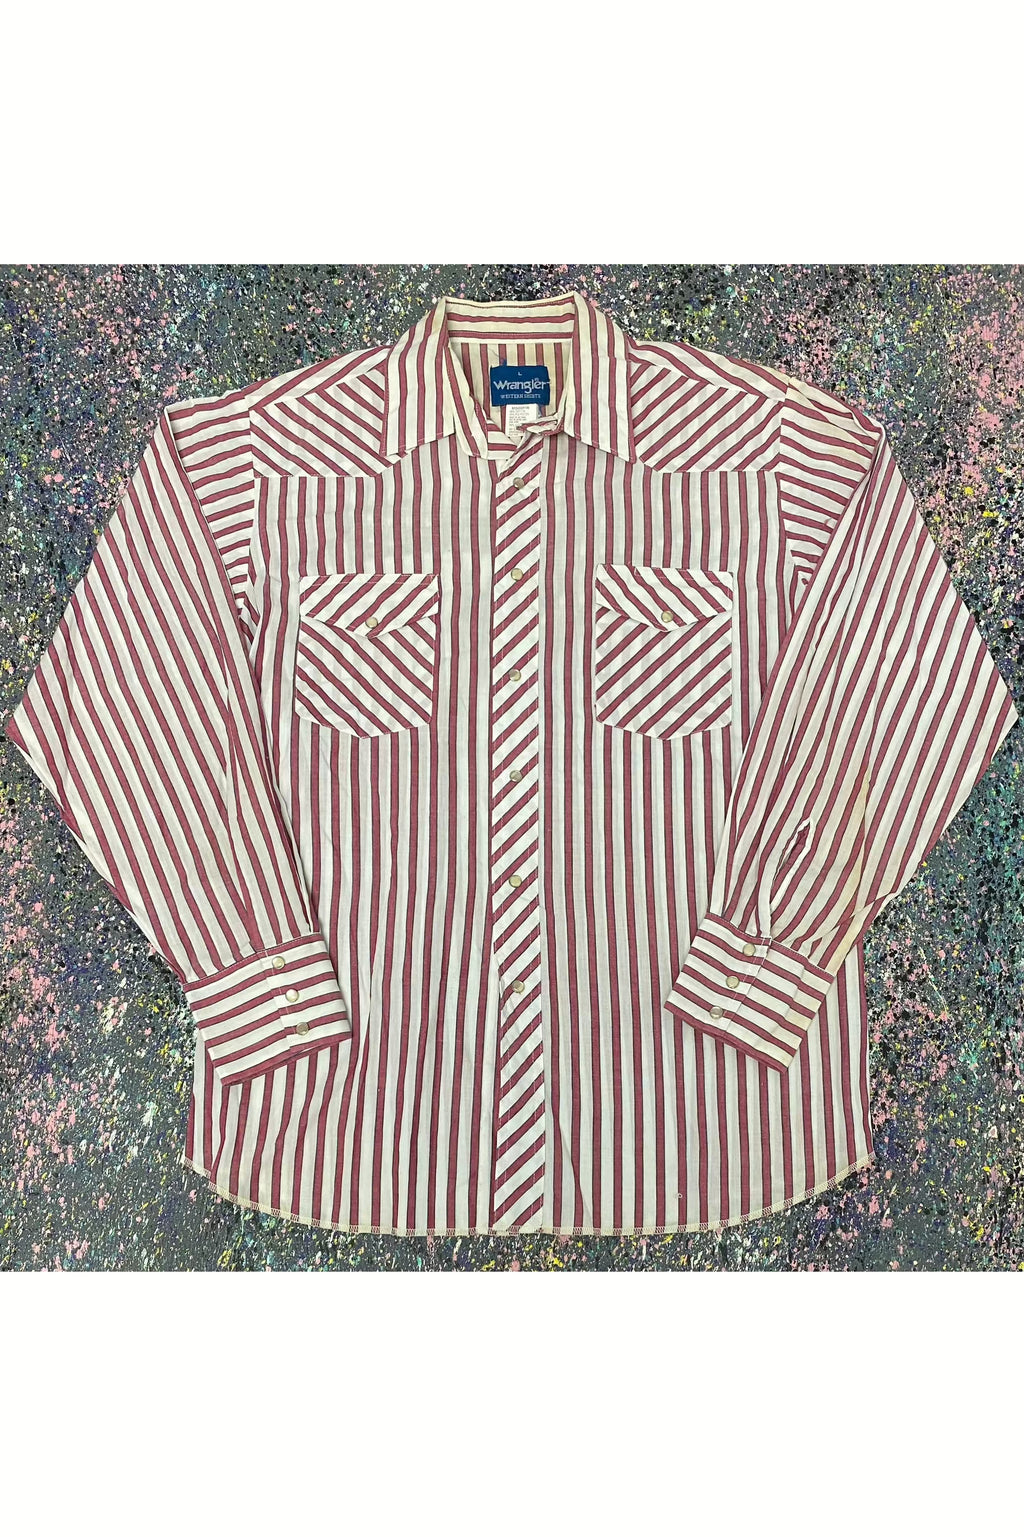 Vintage Wrangler Western Shirts Pearl Snap Striped Button Up Shirt- L